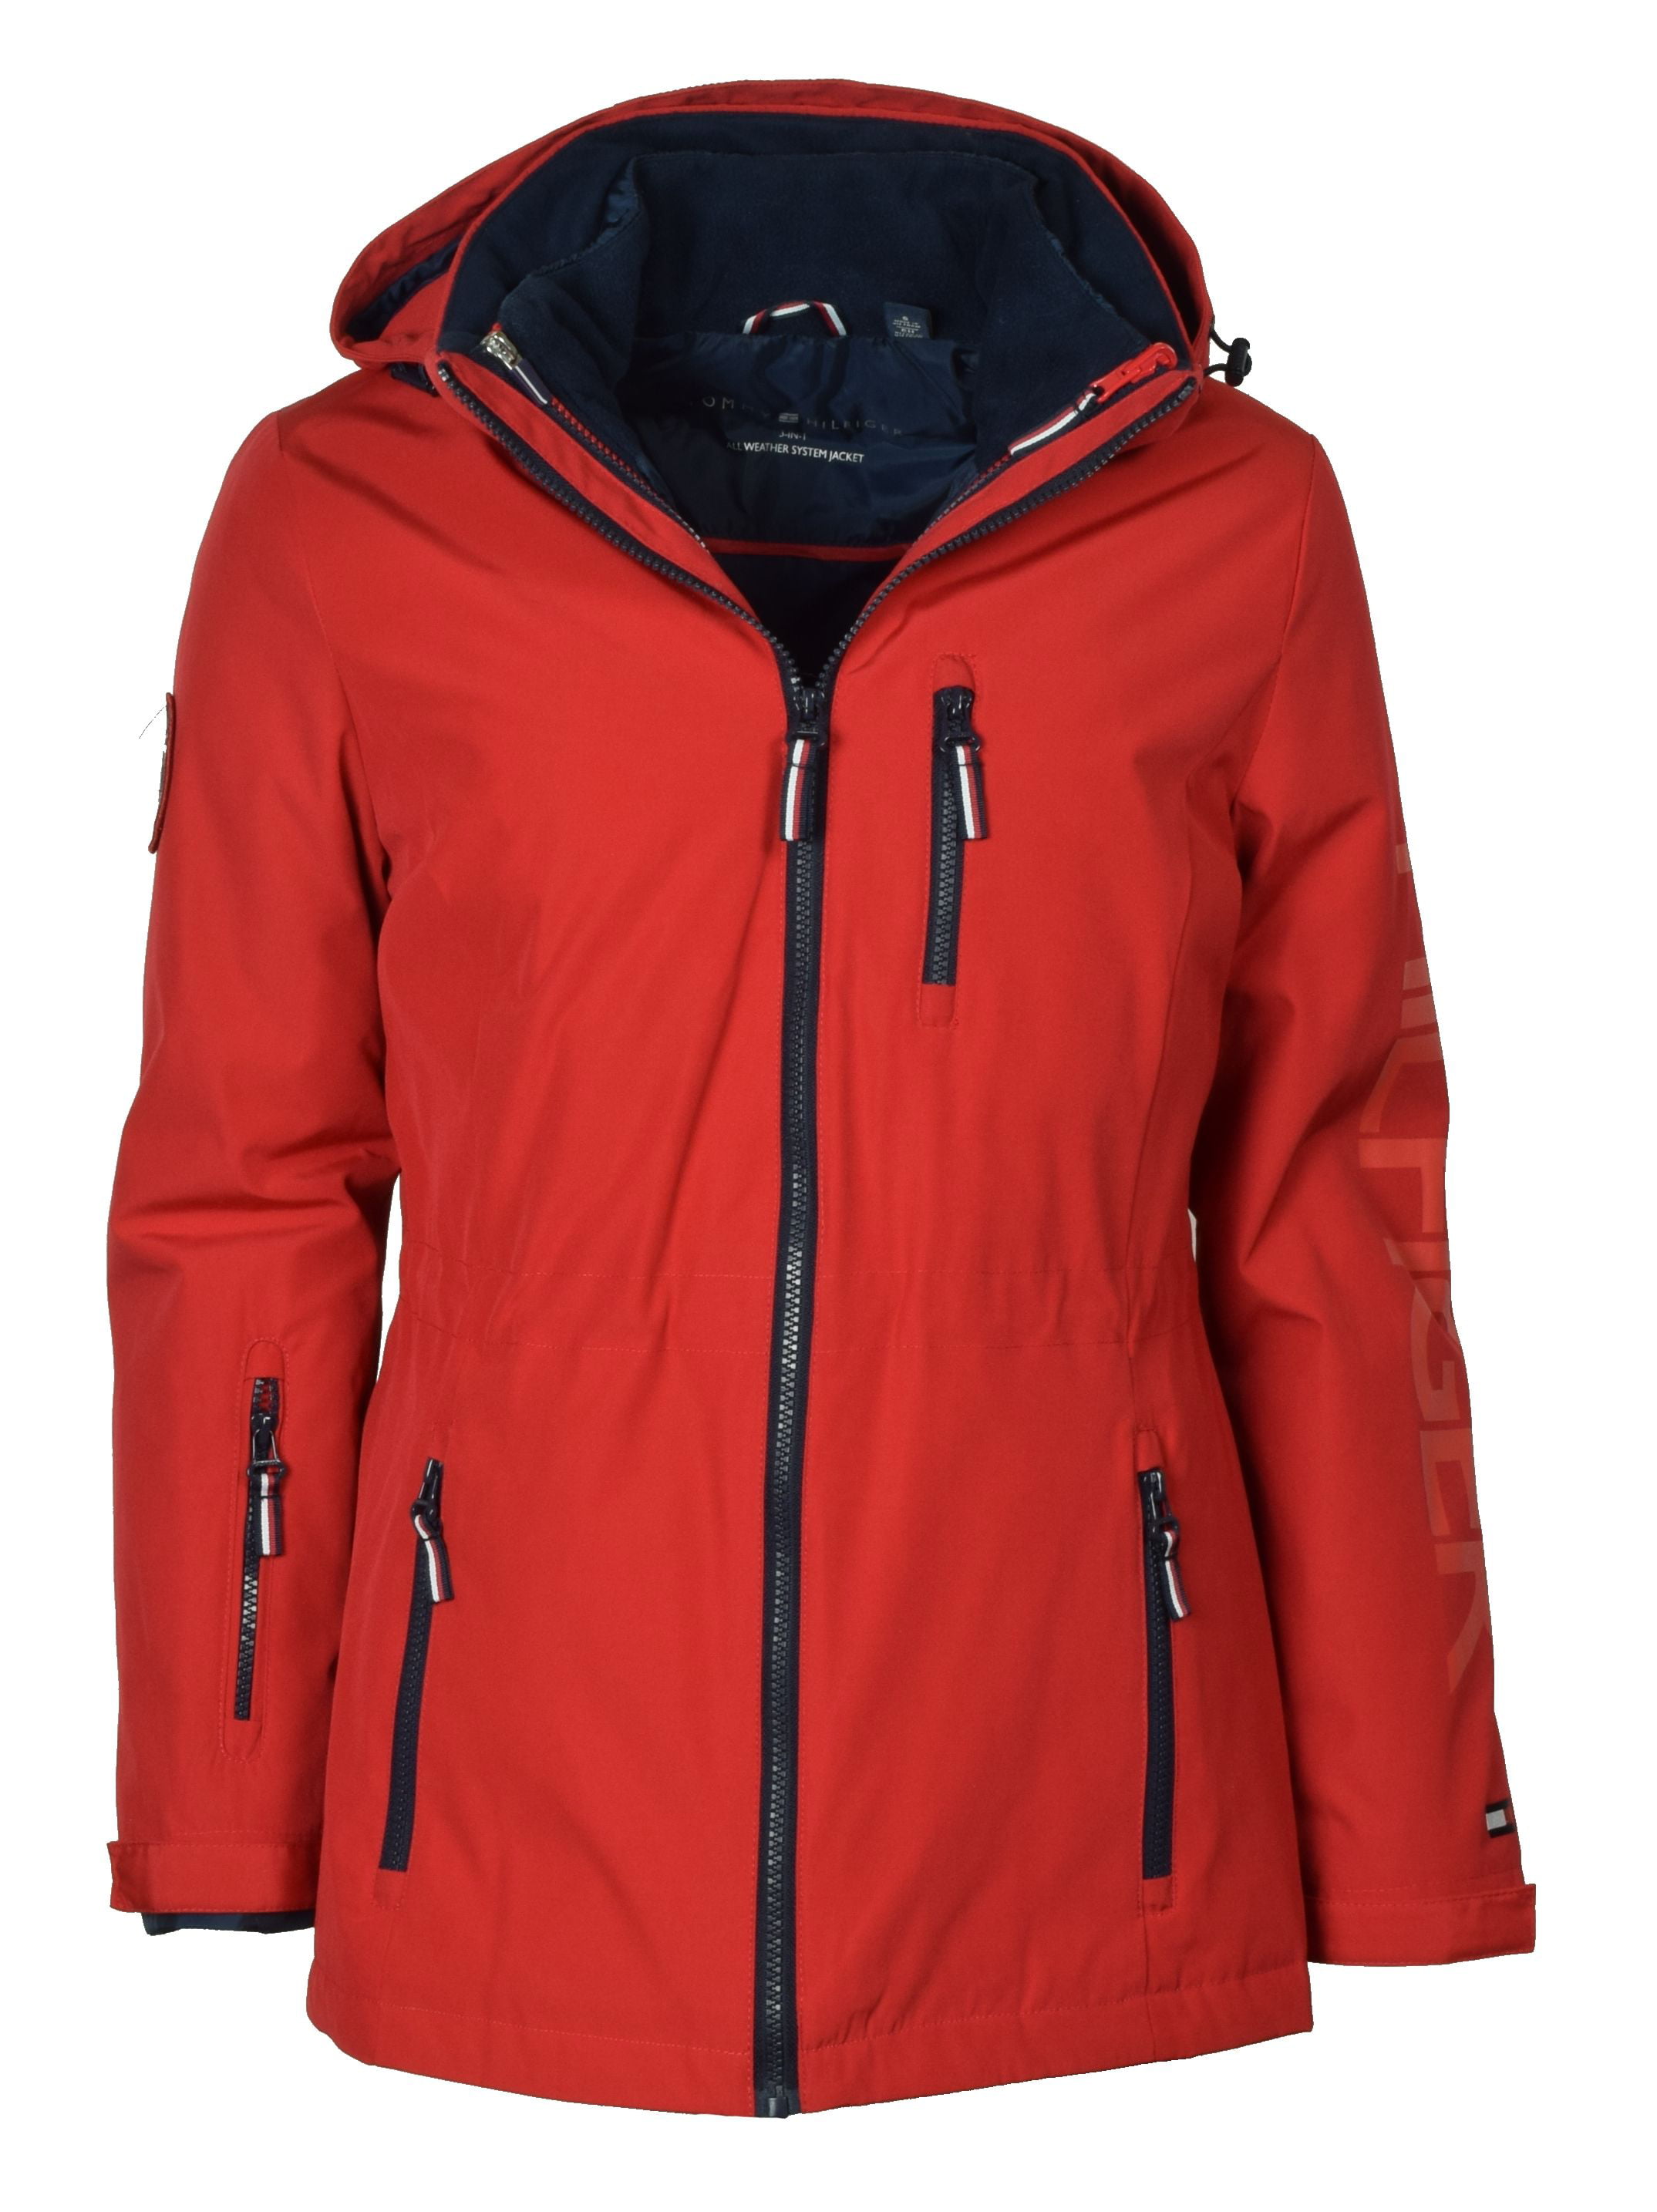 Coats, Jackets & Vests Clothing Tommy Hilfiger Women's 3-in-1 All ...